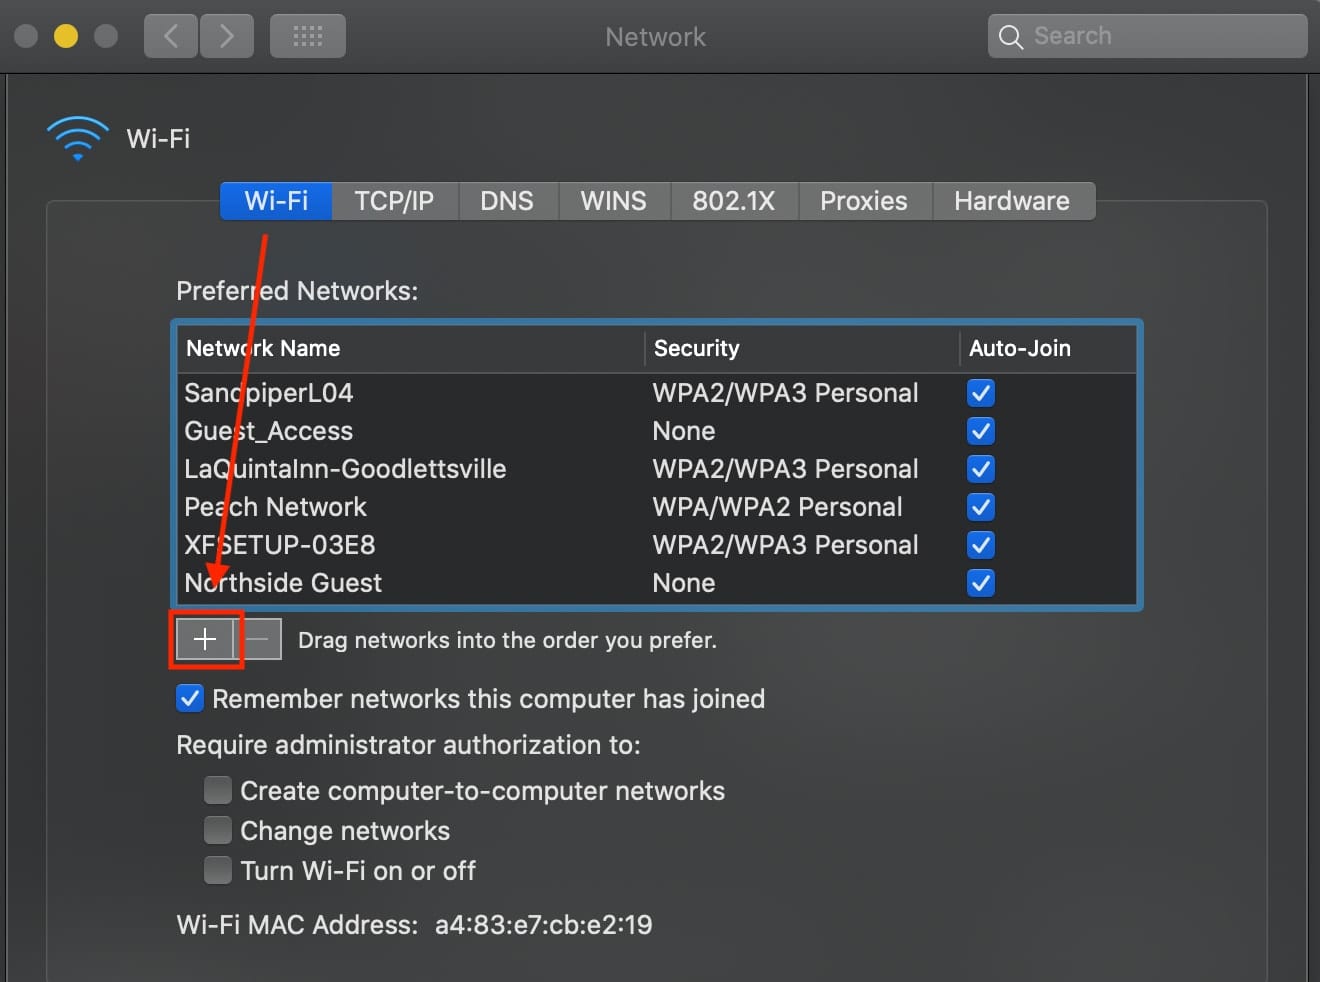 Network preferences showing the "+" button highlighted